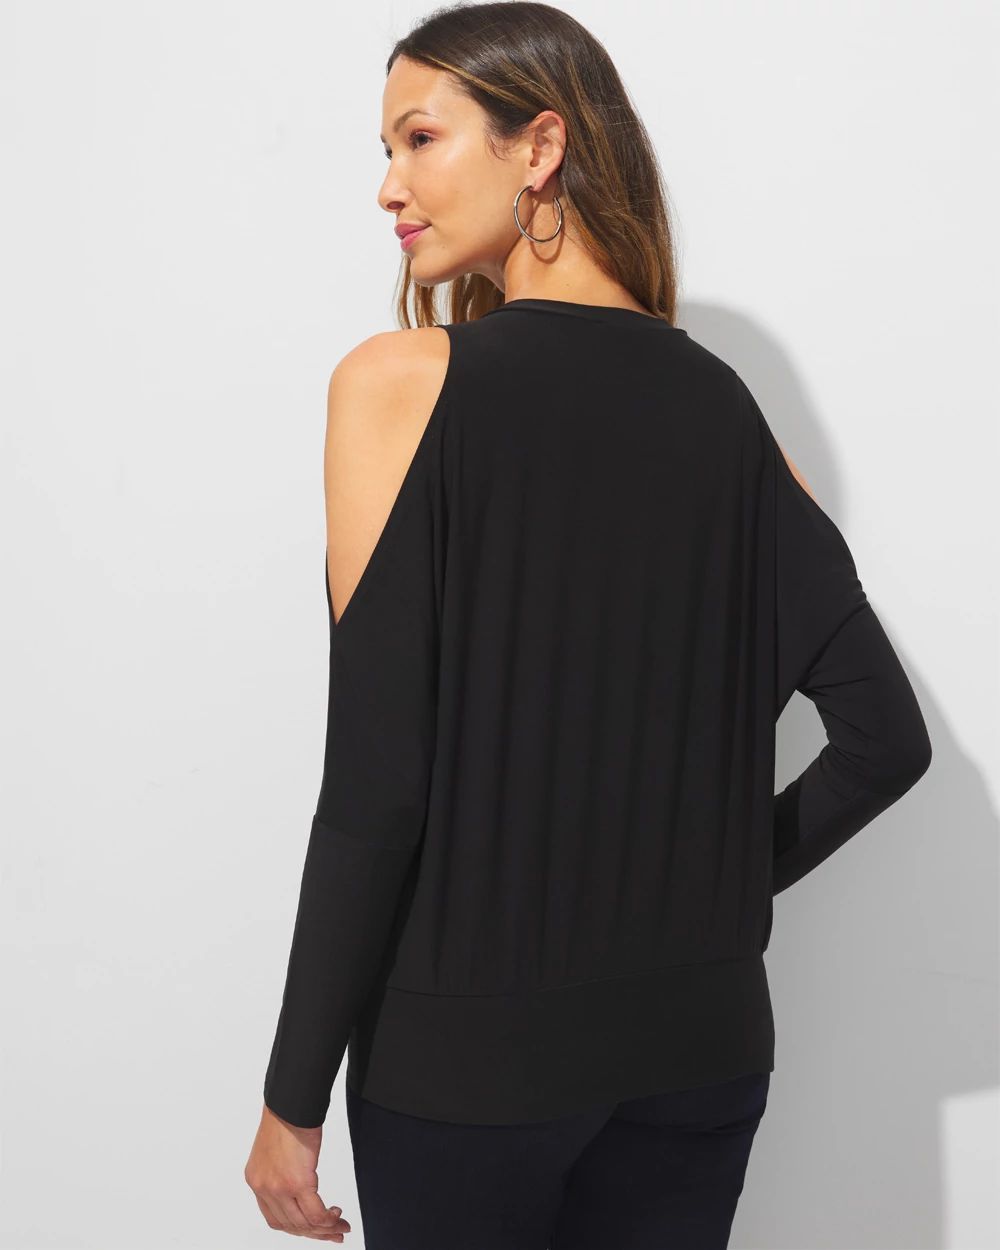 Outlet WHBM Cold Shoulder Top click to view larger image.